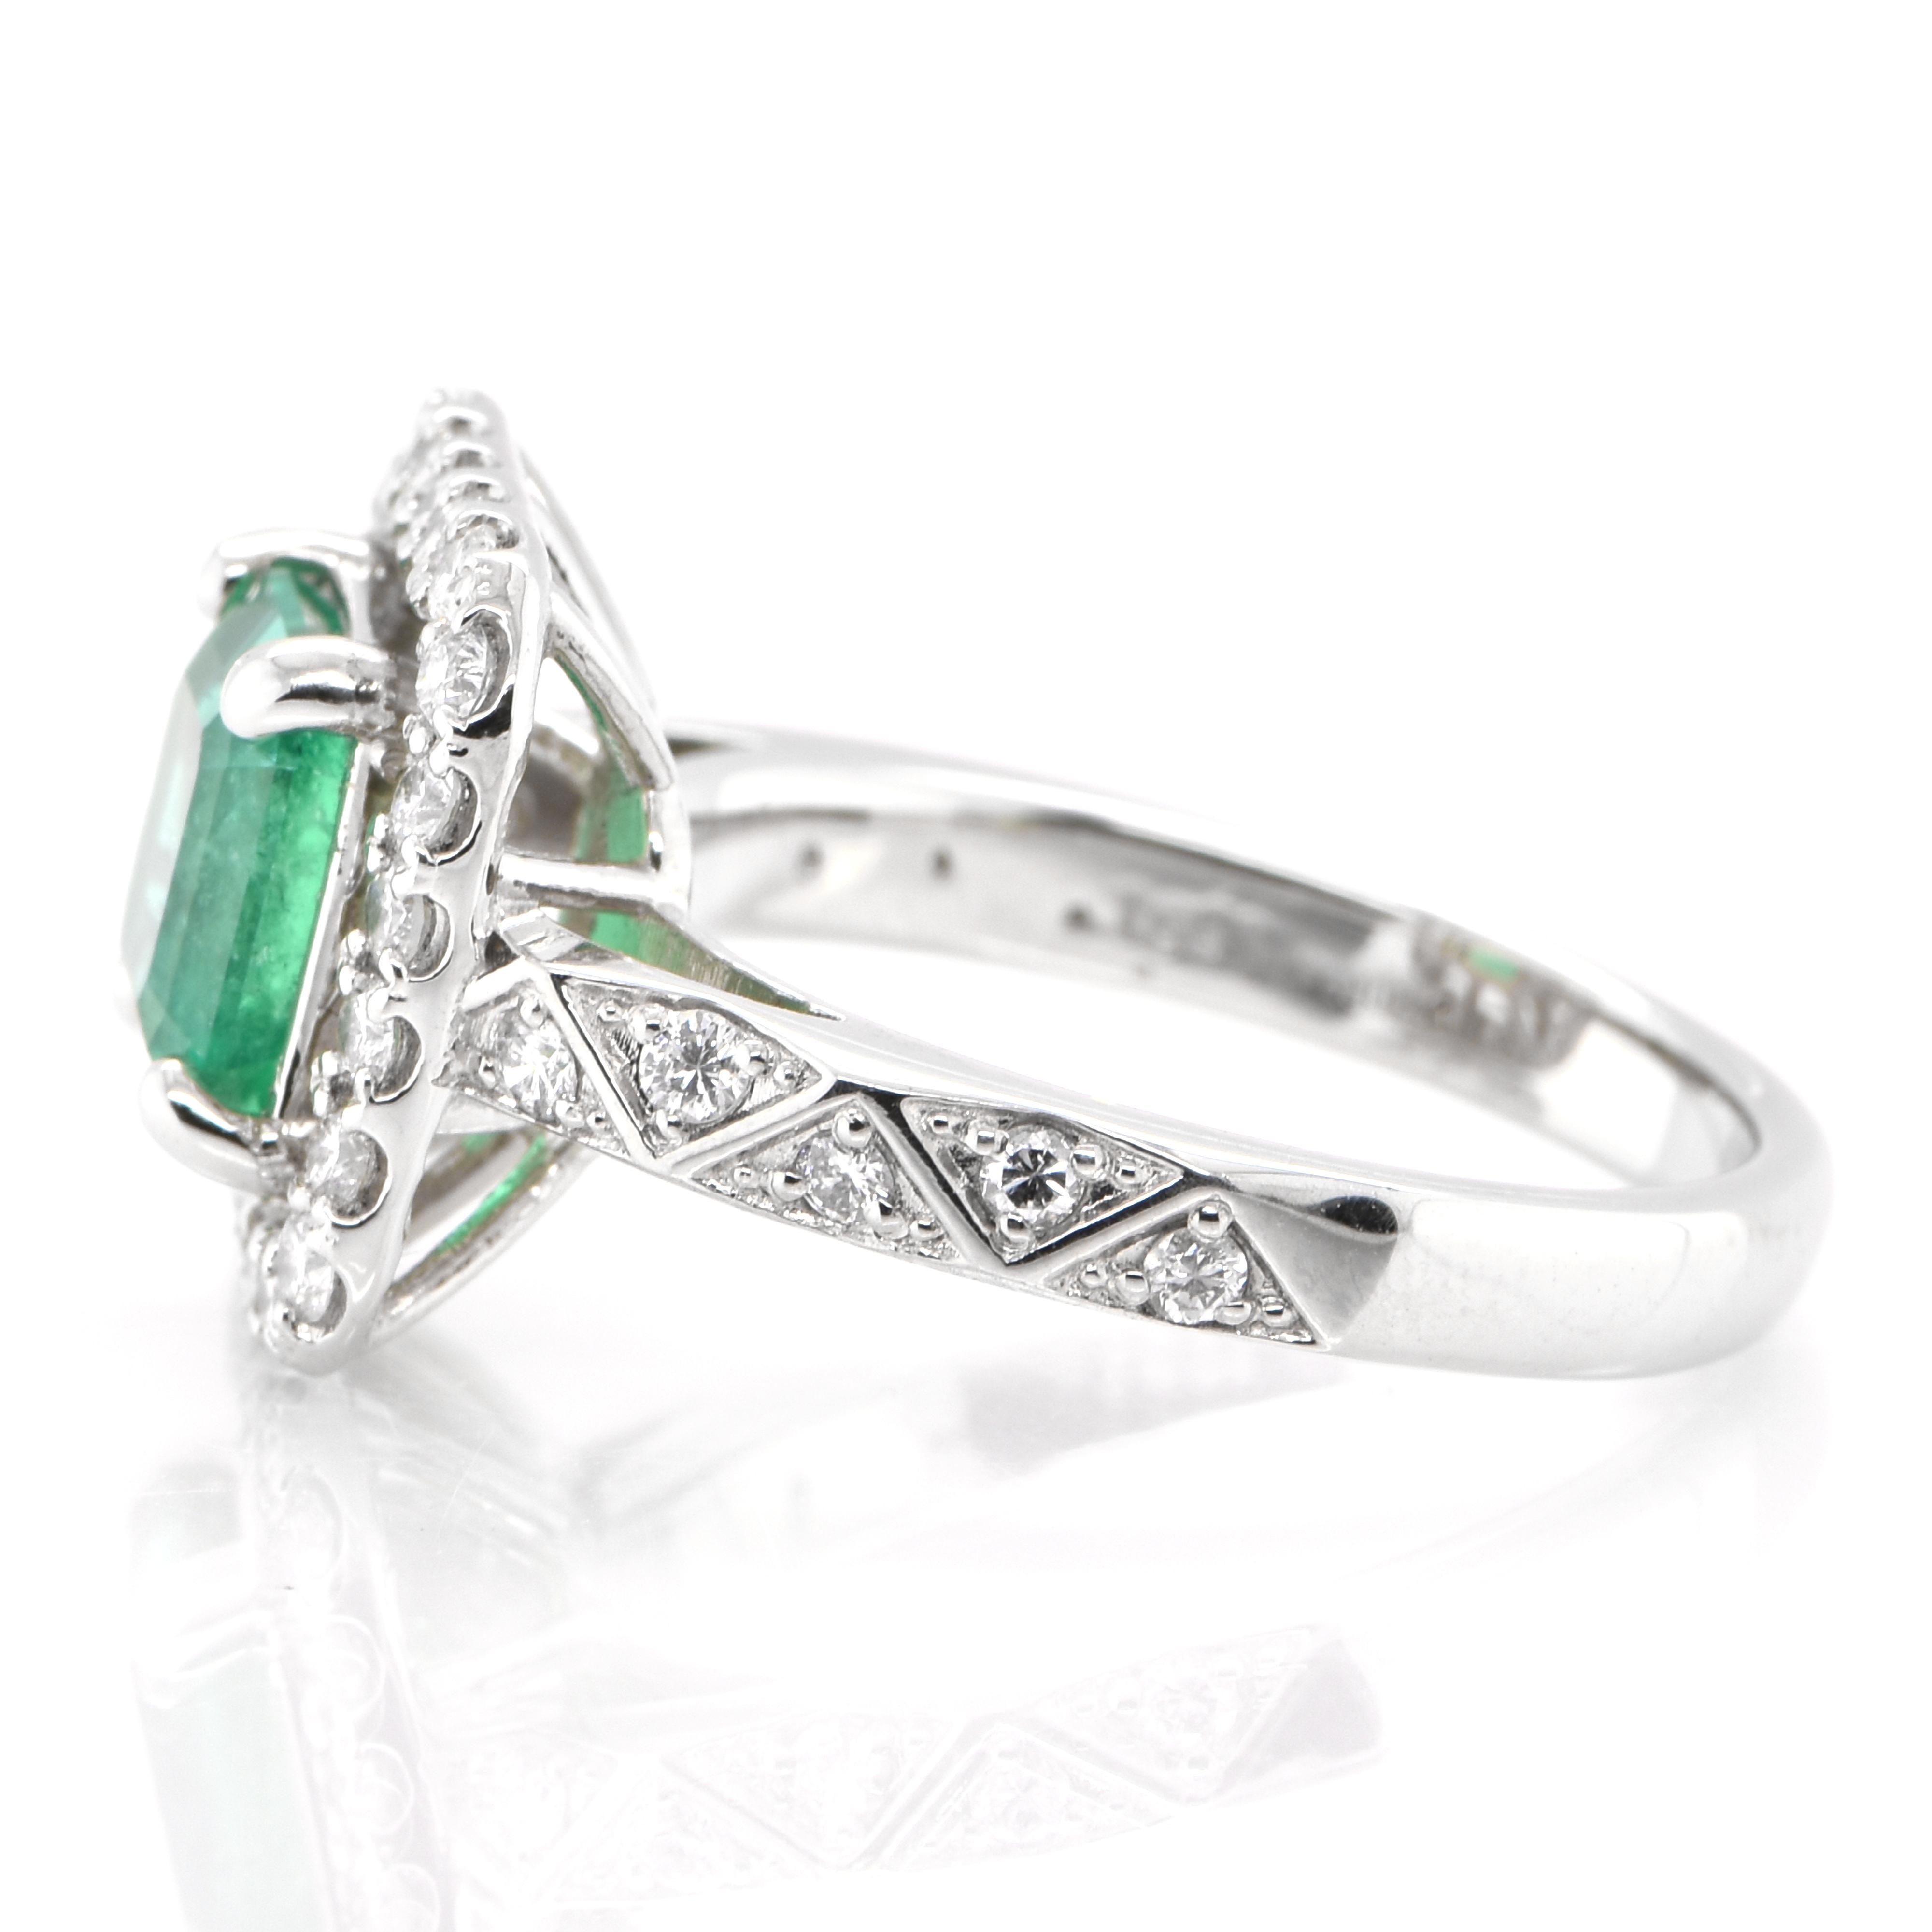 Emerald Cut 1.69 Carat Natural Emerald and Diamond Ring Set in Platinum For Sale